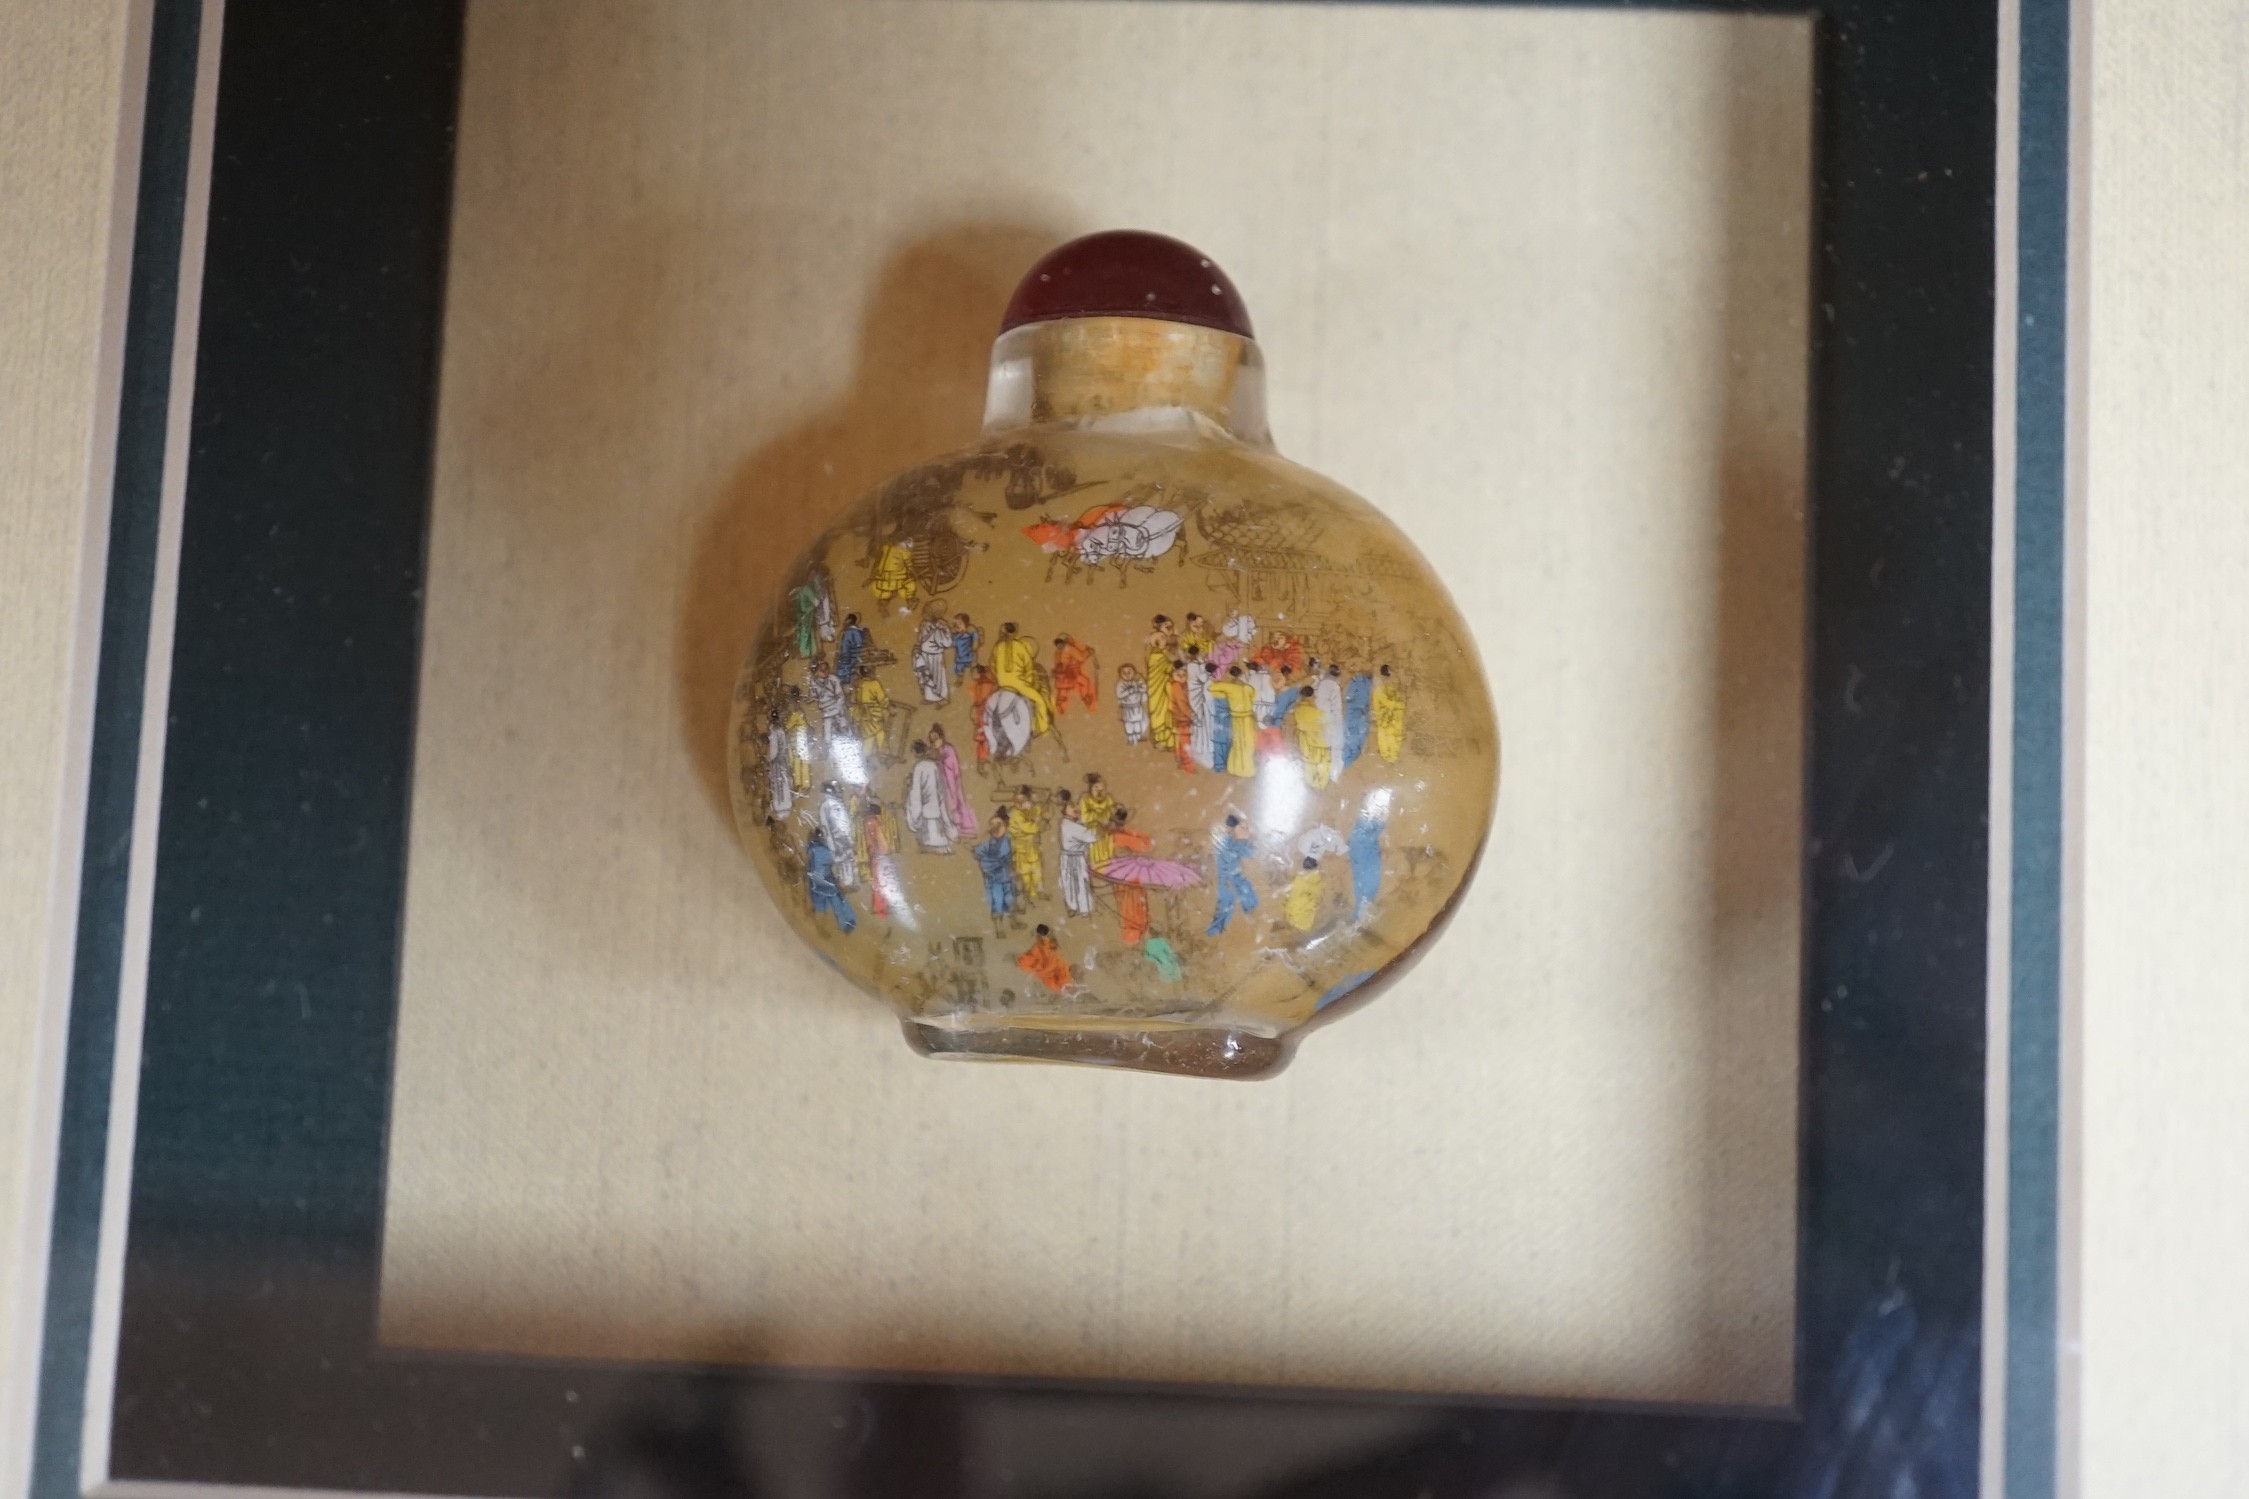 Three framed and mounted Chinese inside-painted snuff bottles and four other items